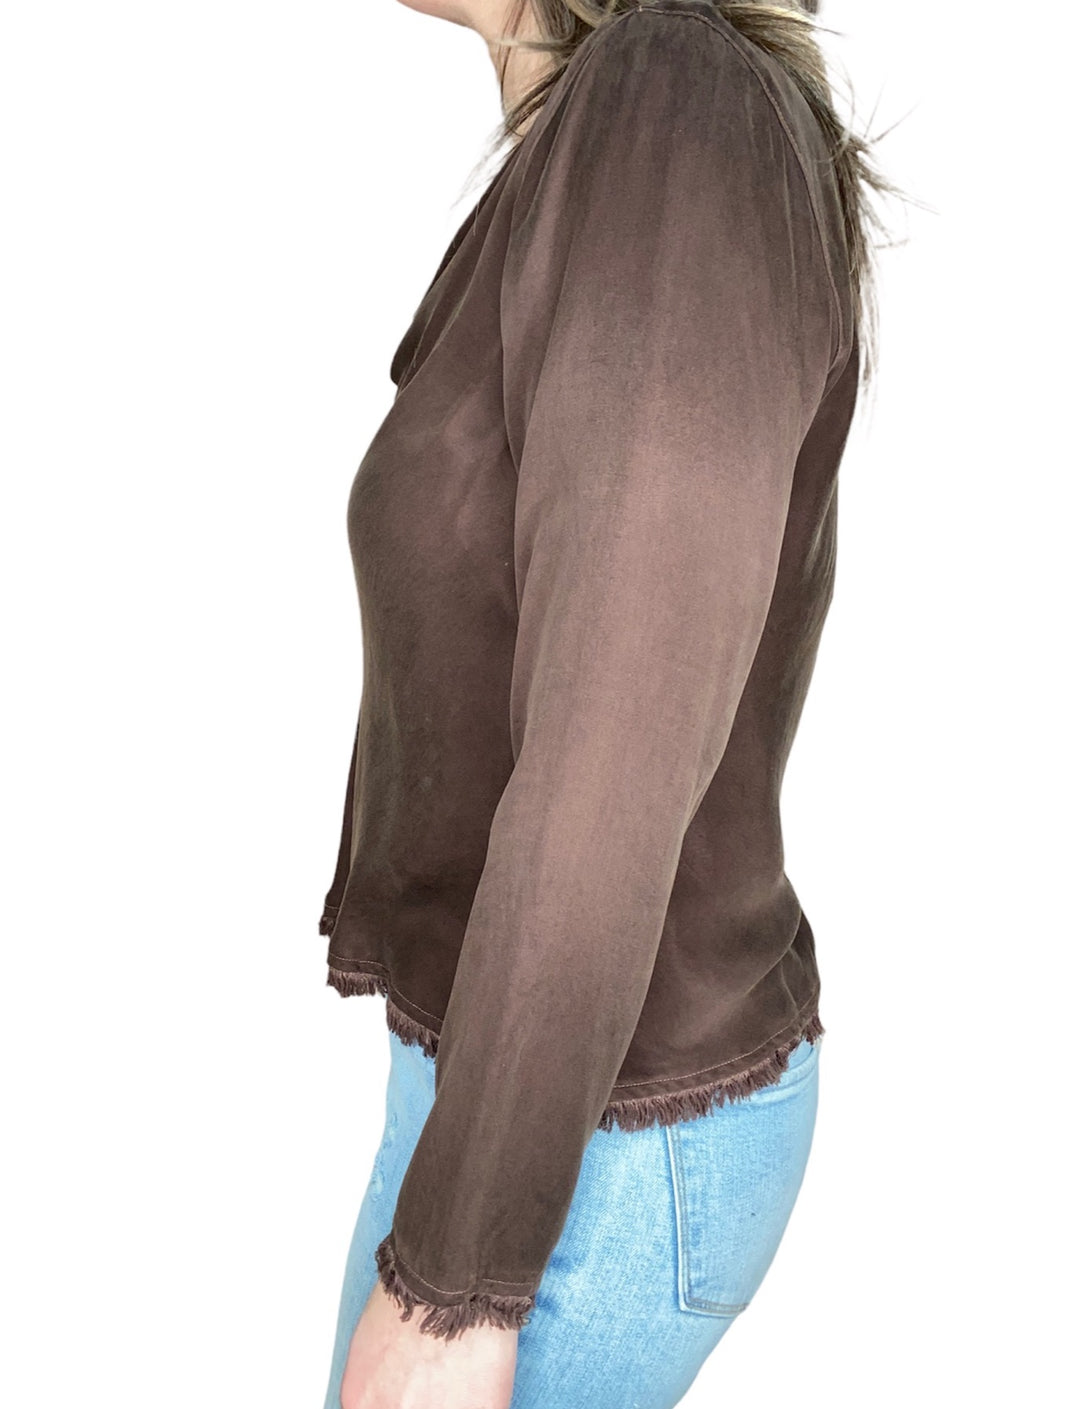 COWL NECK FRAY TOP - Kingfisher Road - Online Boutique